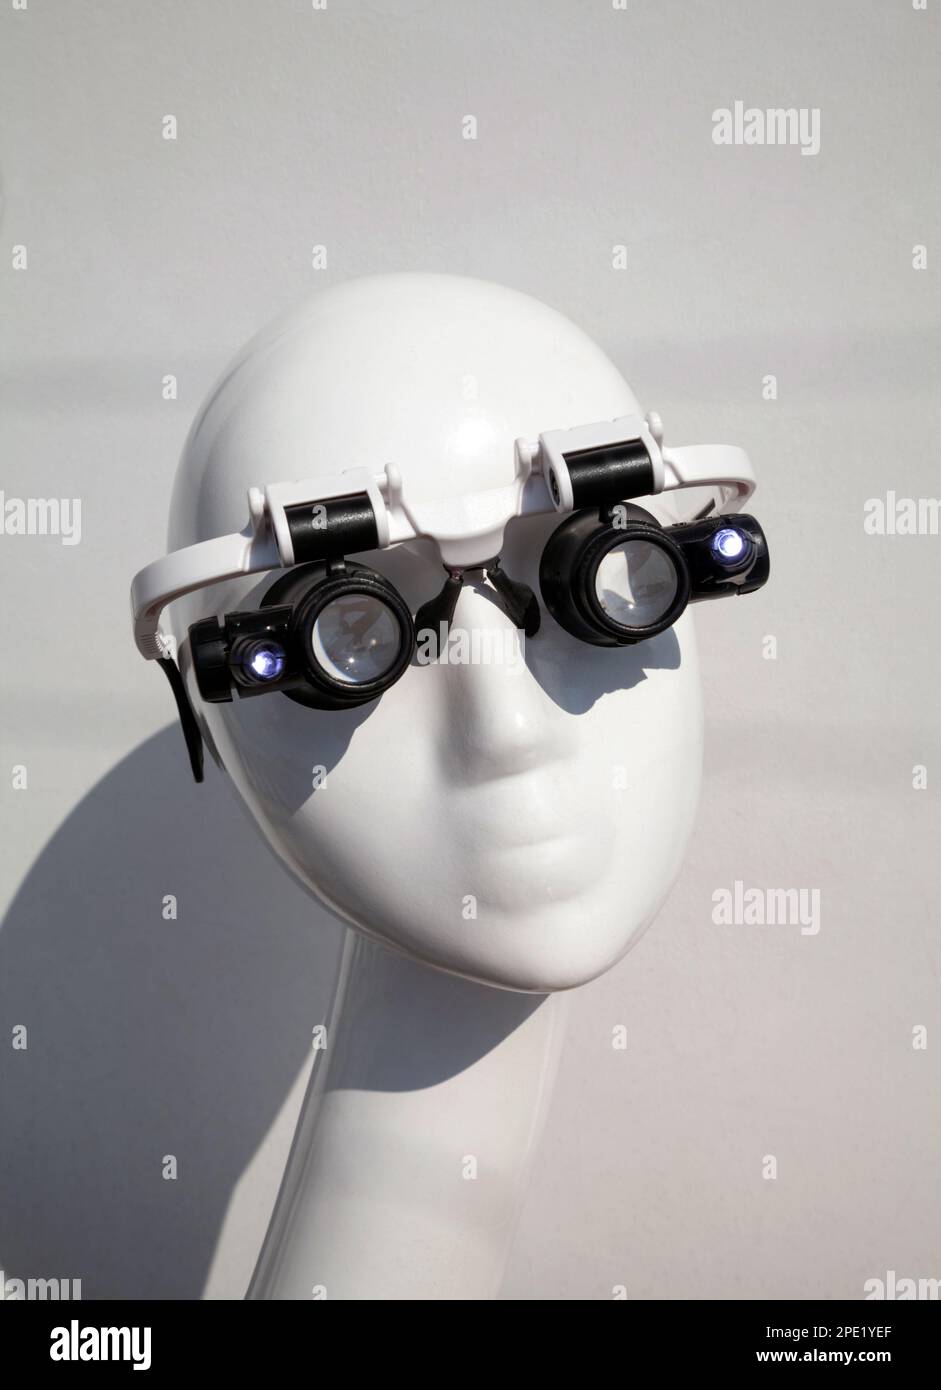 Mannequin wearing double eye magnifying glasses with LED light illumination. High magnification lens handsfree glasses for professionals, specialists, Stock Photo